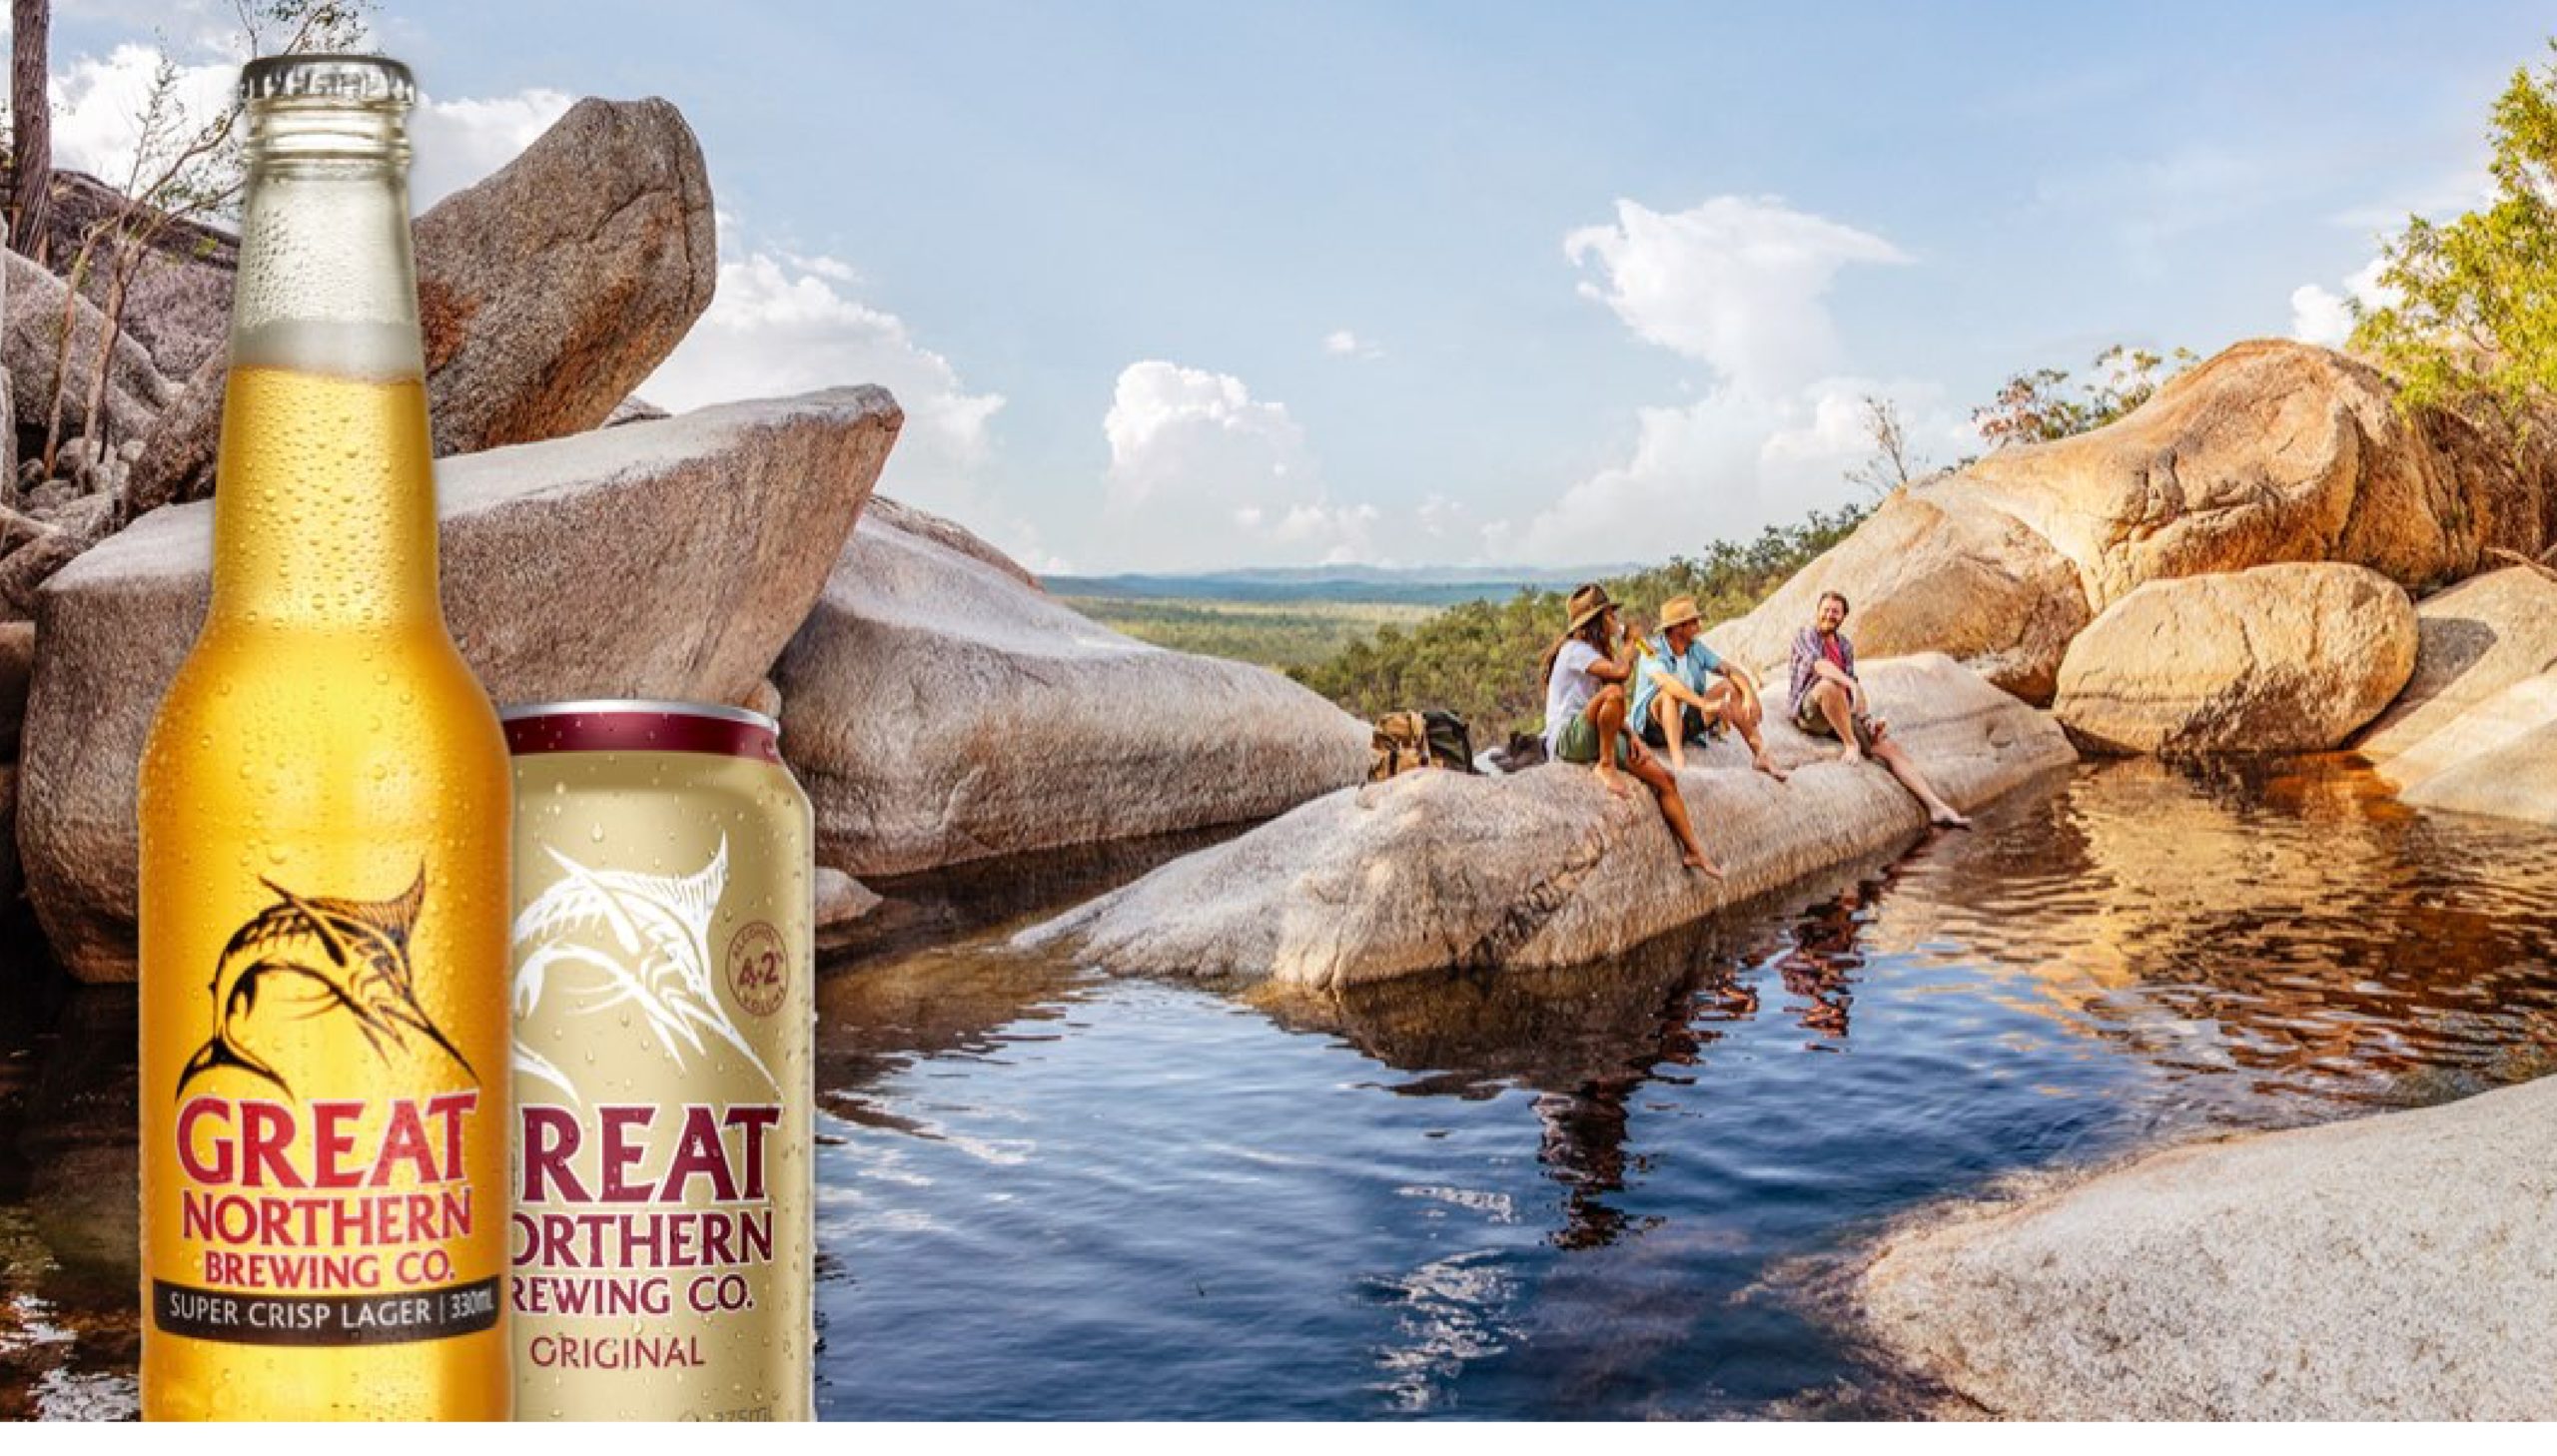 Great Northern branded beer bottle and can situated on an image of three people enjoying a relaxing afternoon by a pool of water in the Australian outback